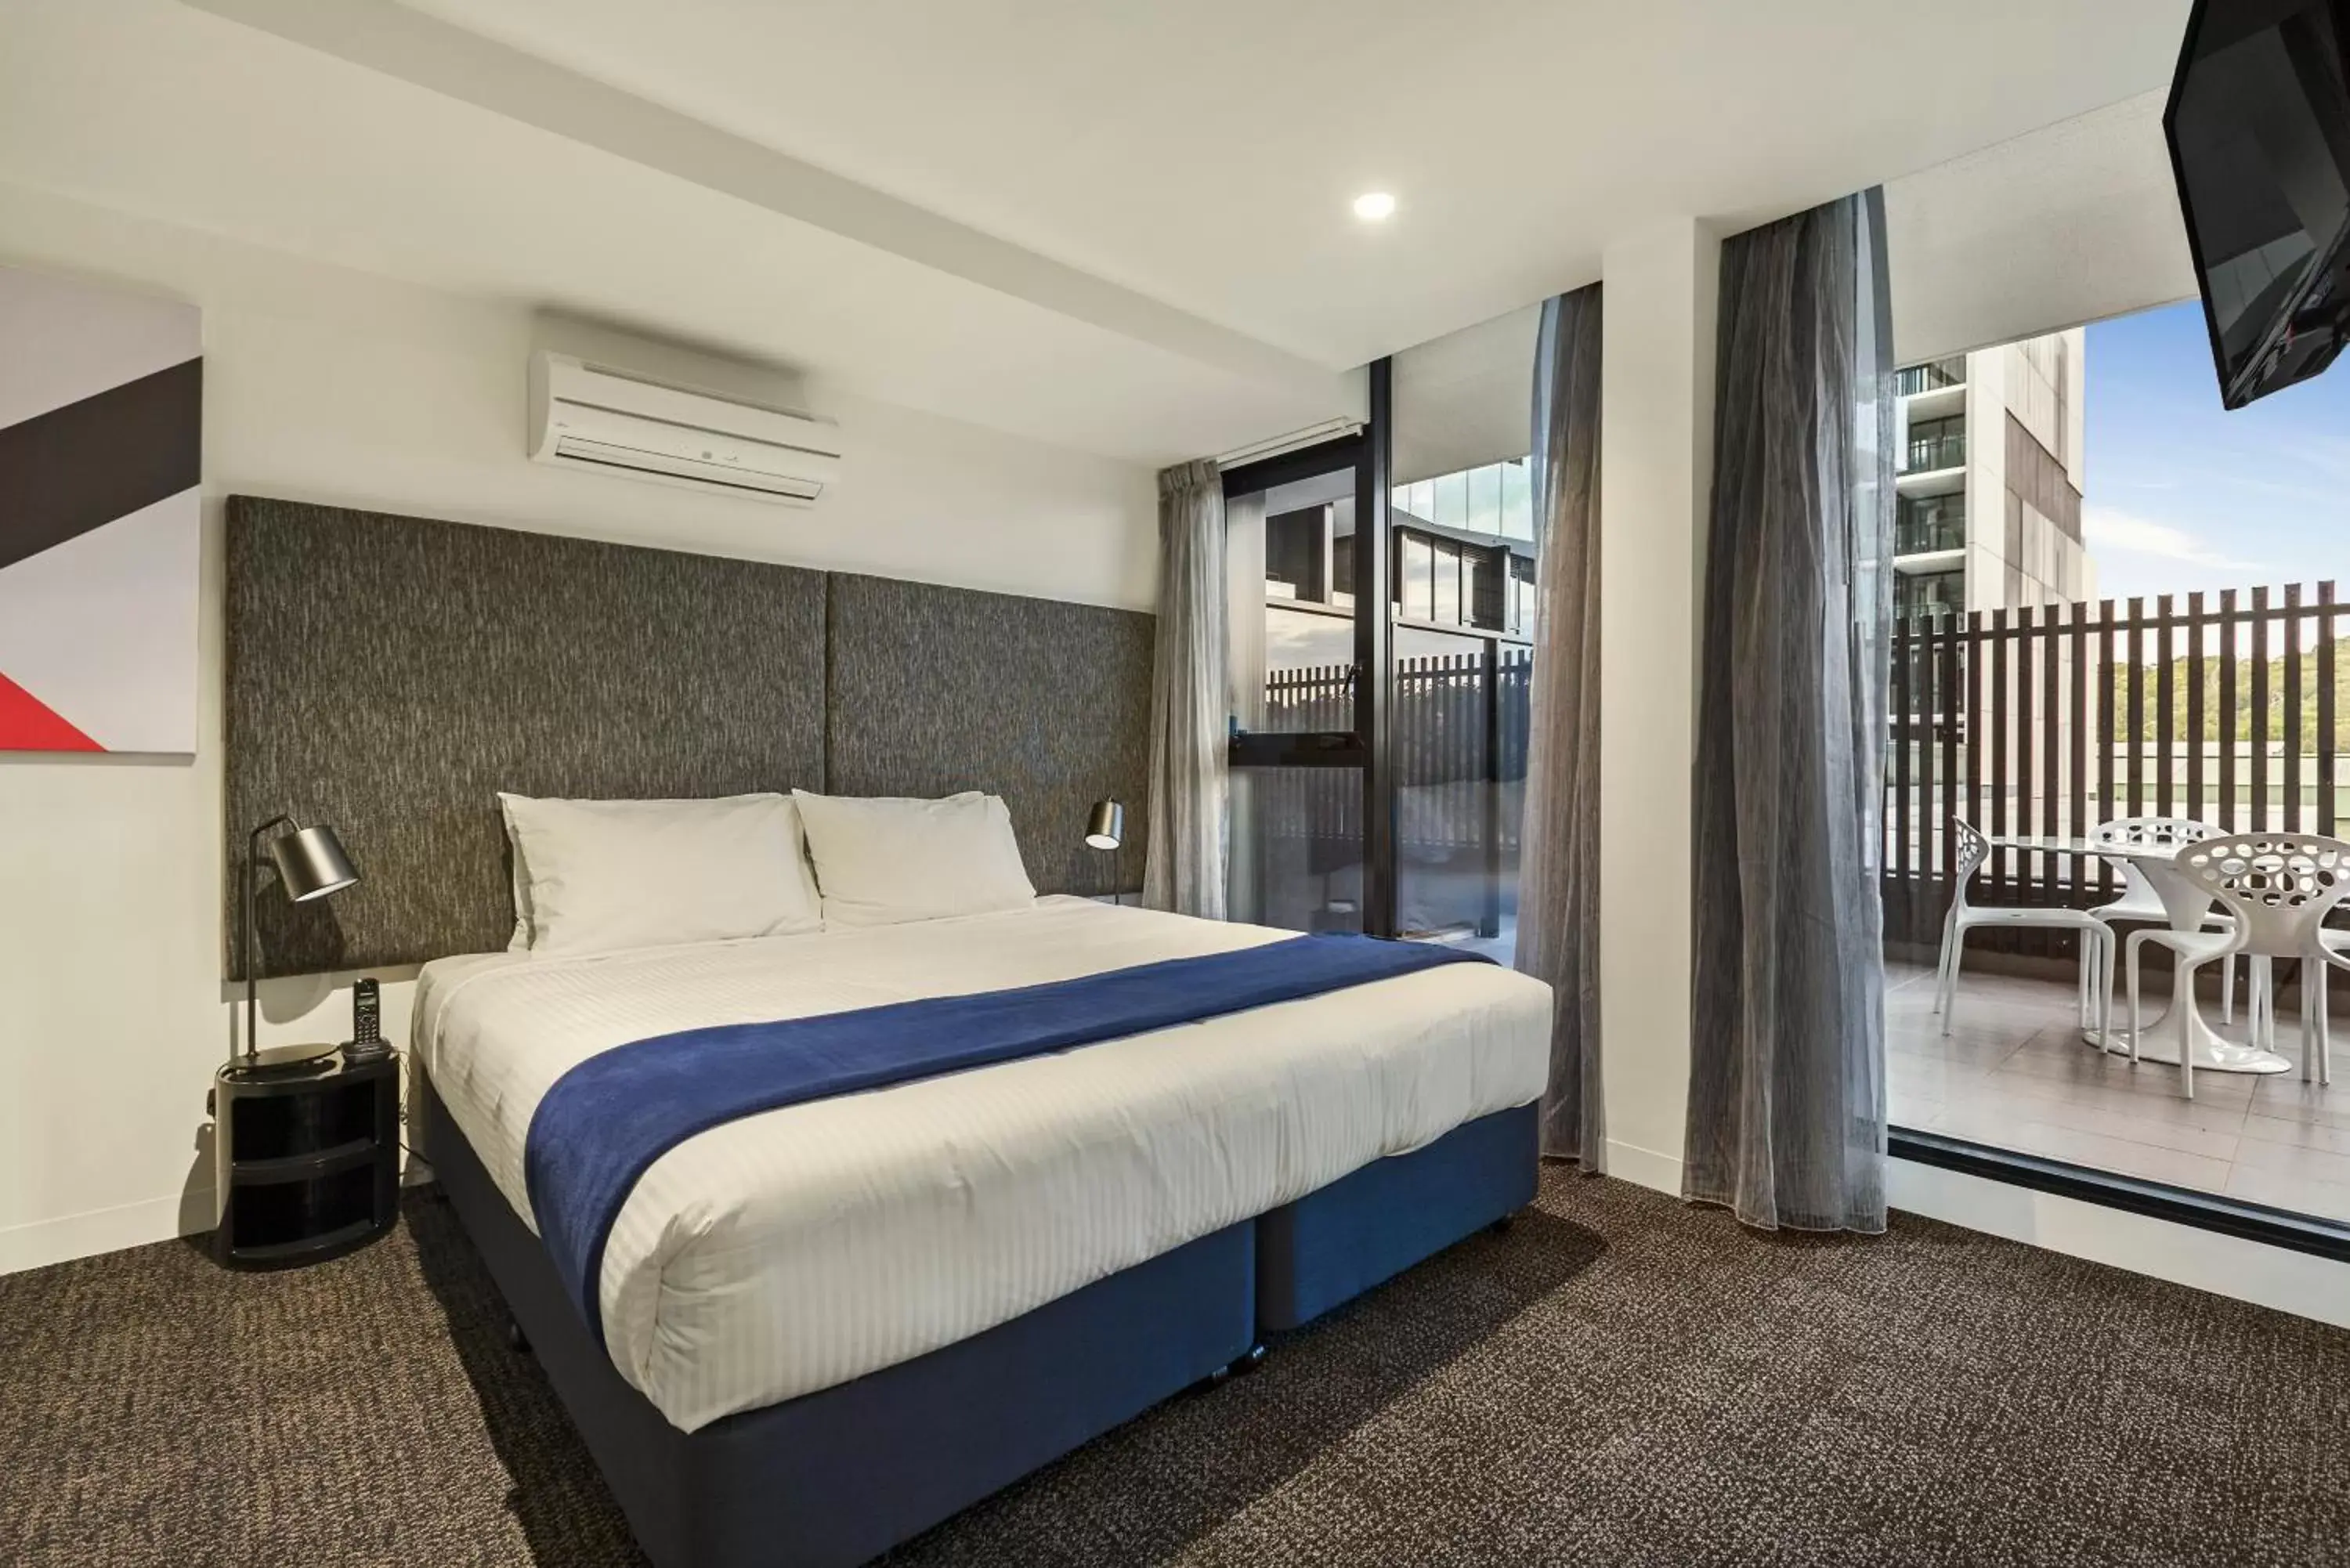 Bed in Corporate Living Accommodation Abbotsford